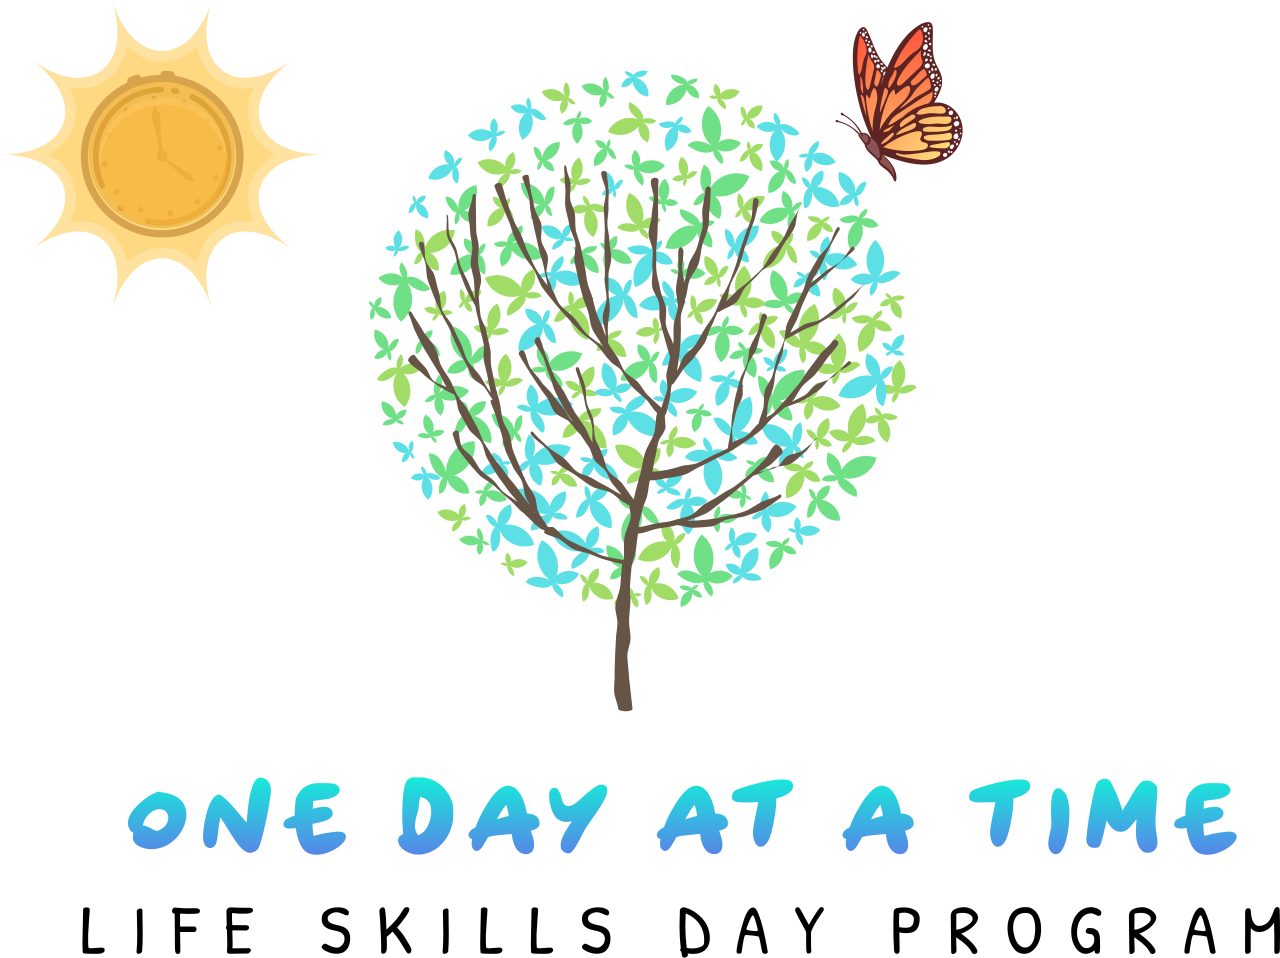 One Day at a Time's logo